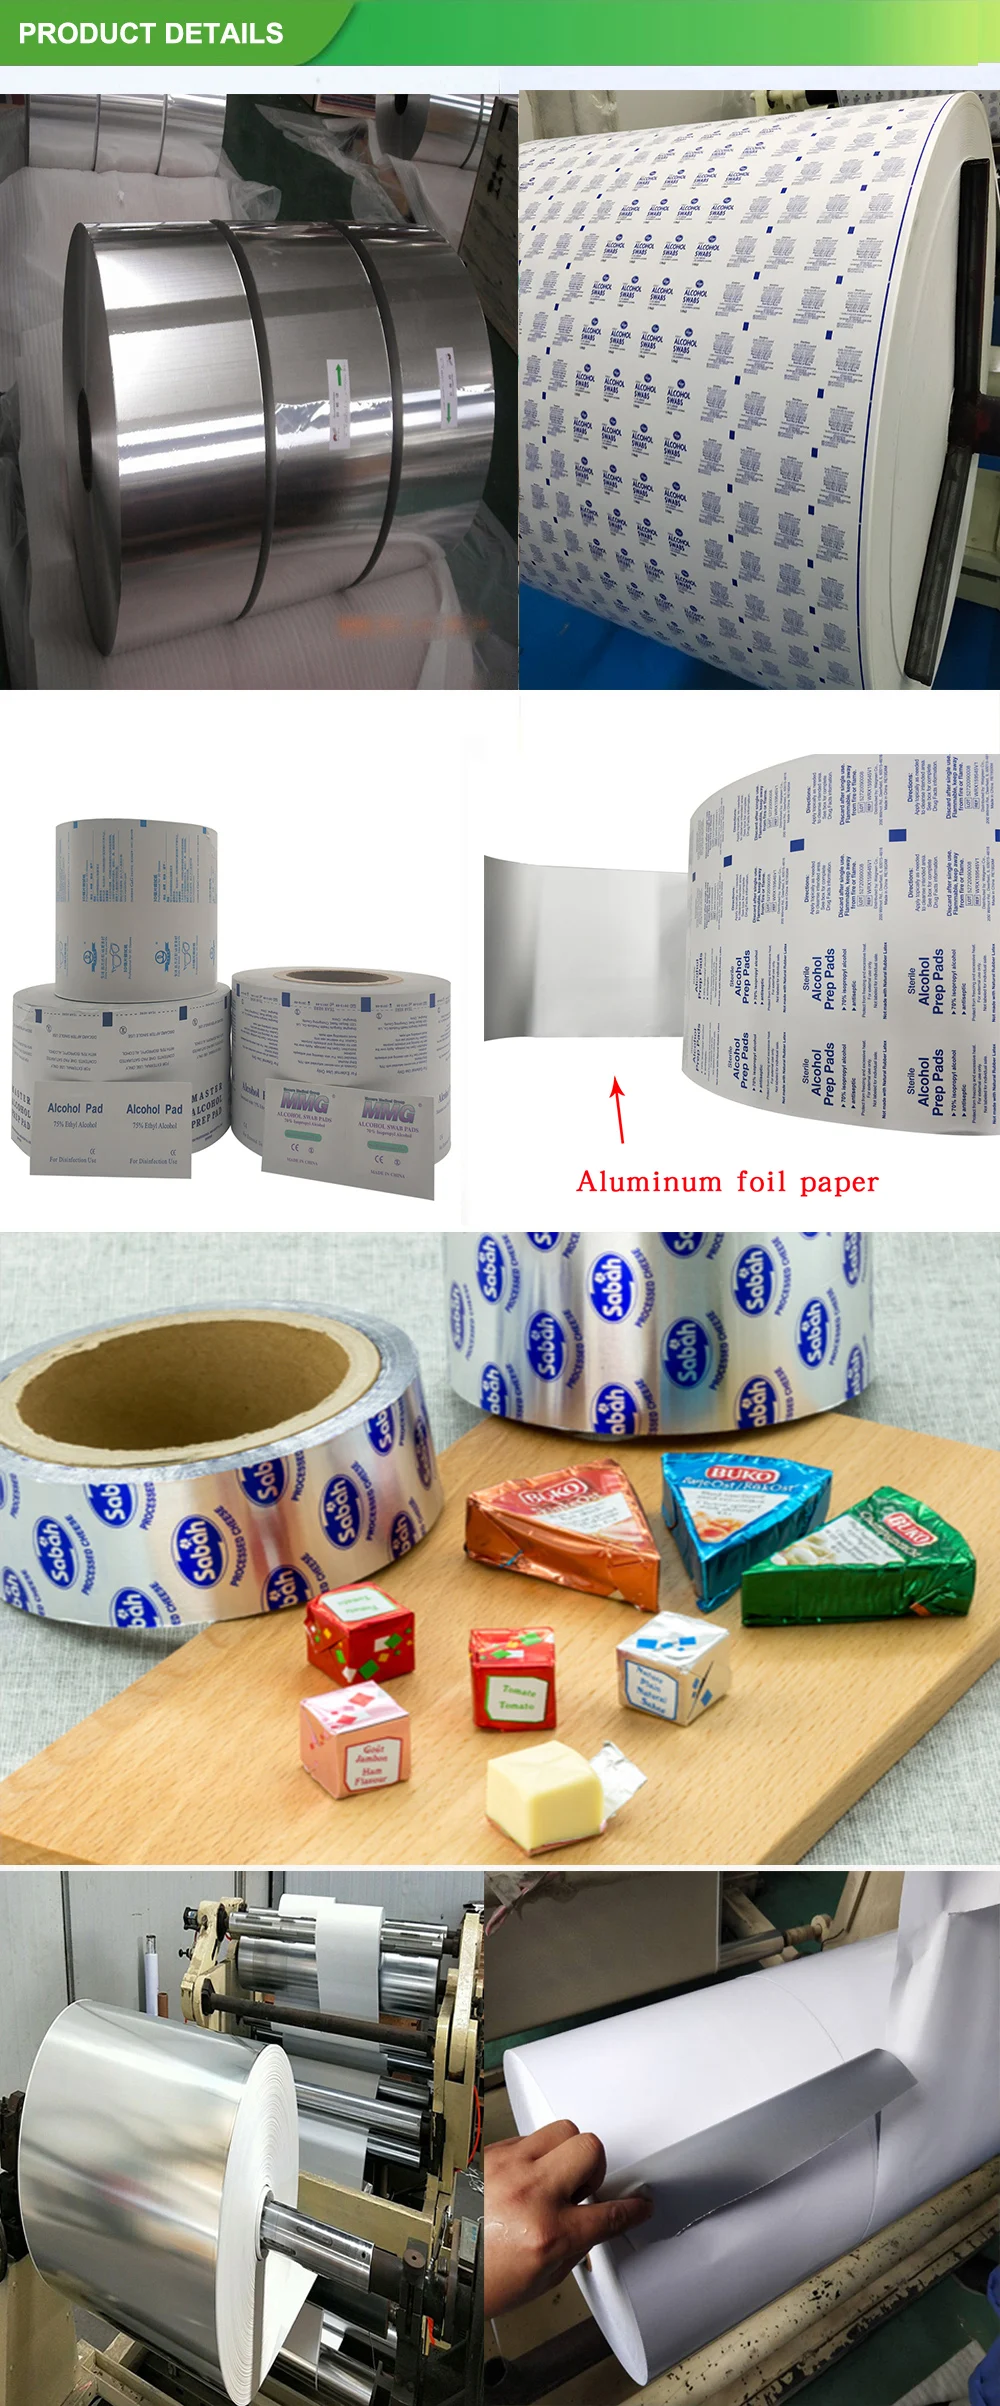 Foil Wrapping Paper Aluminum Laminated Cheese